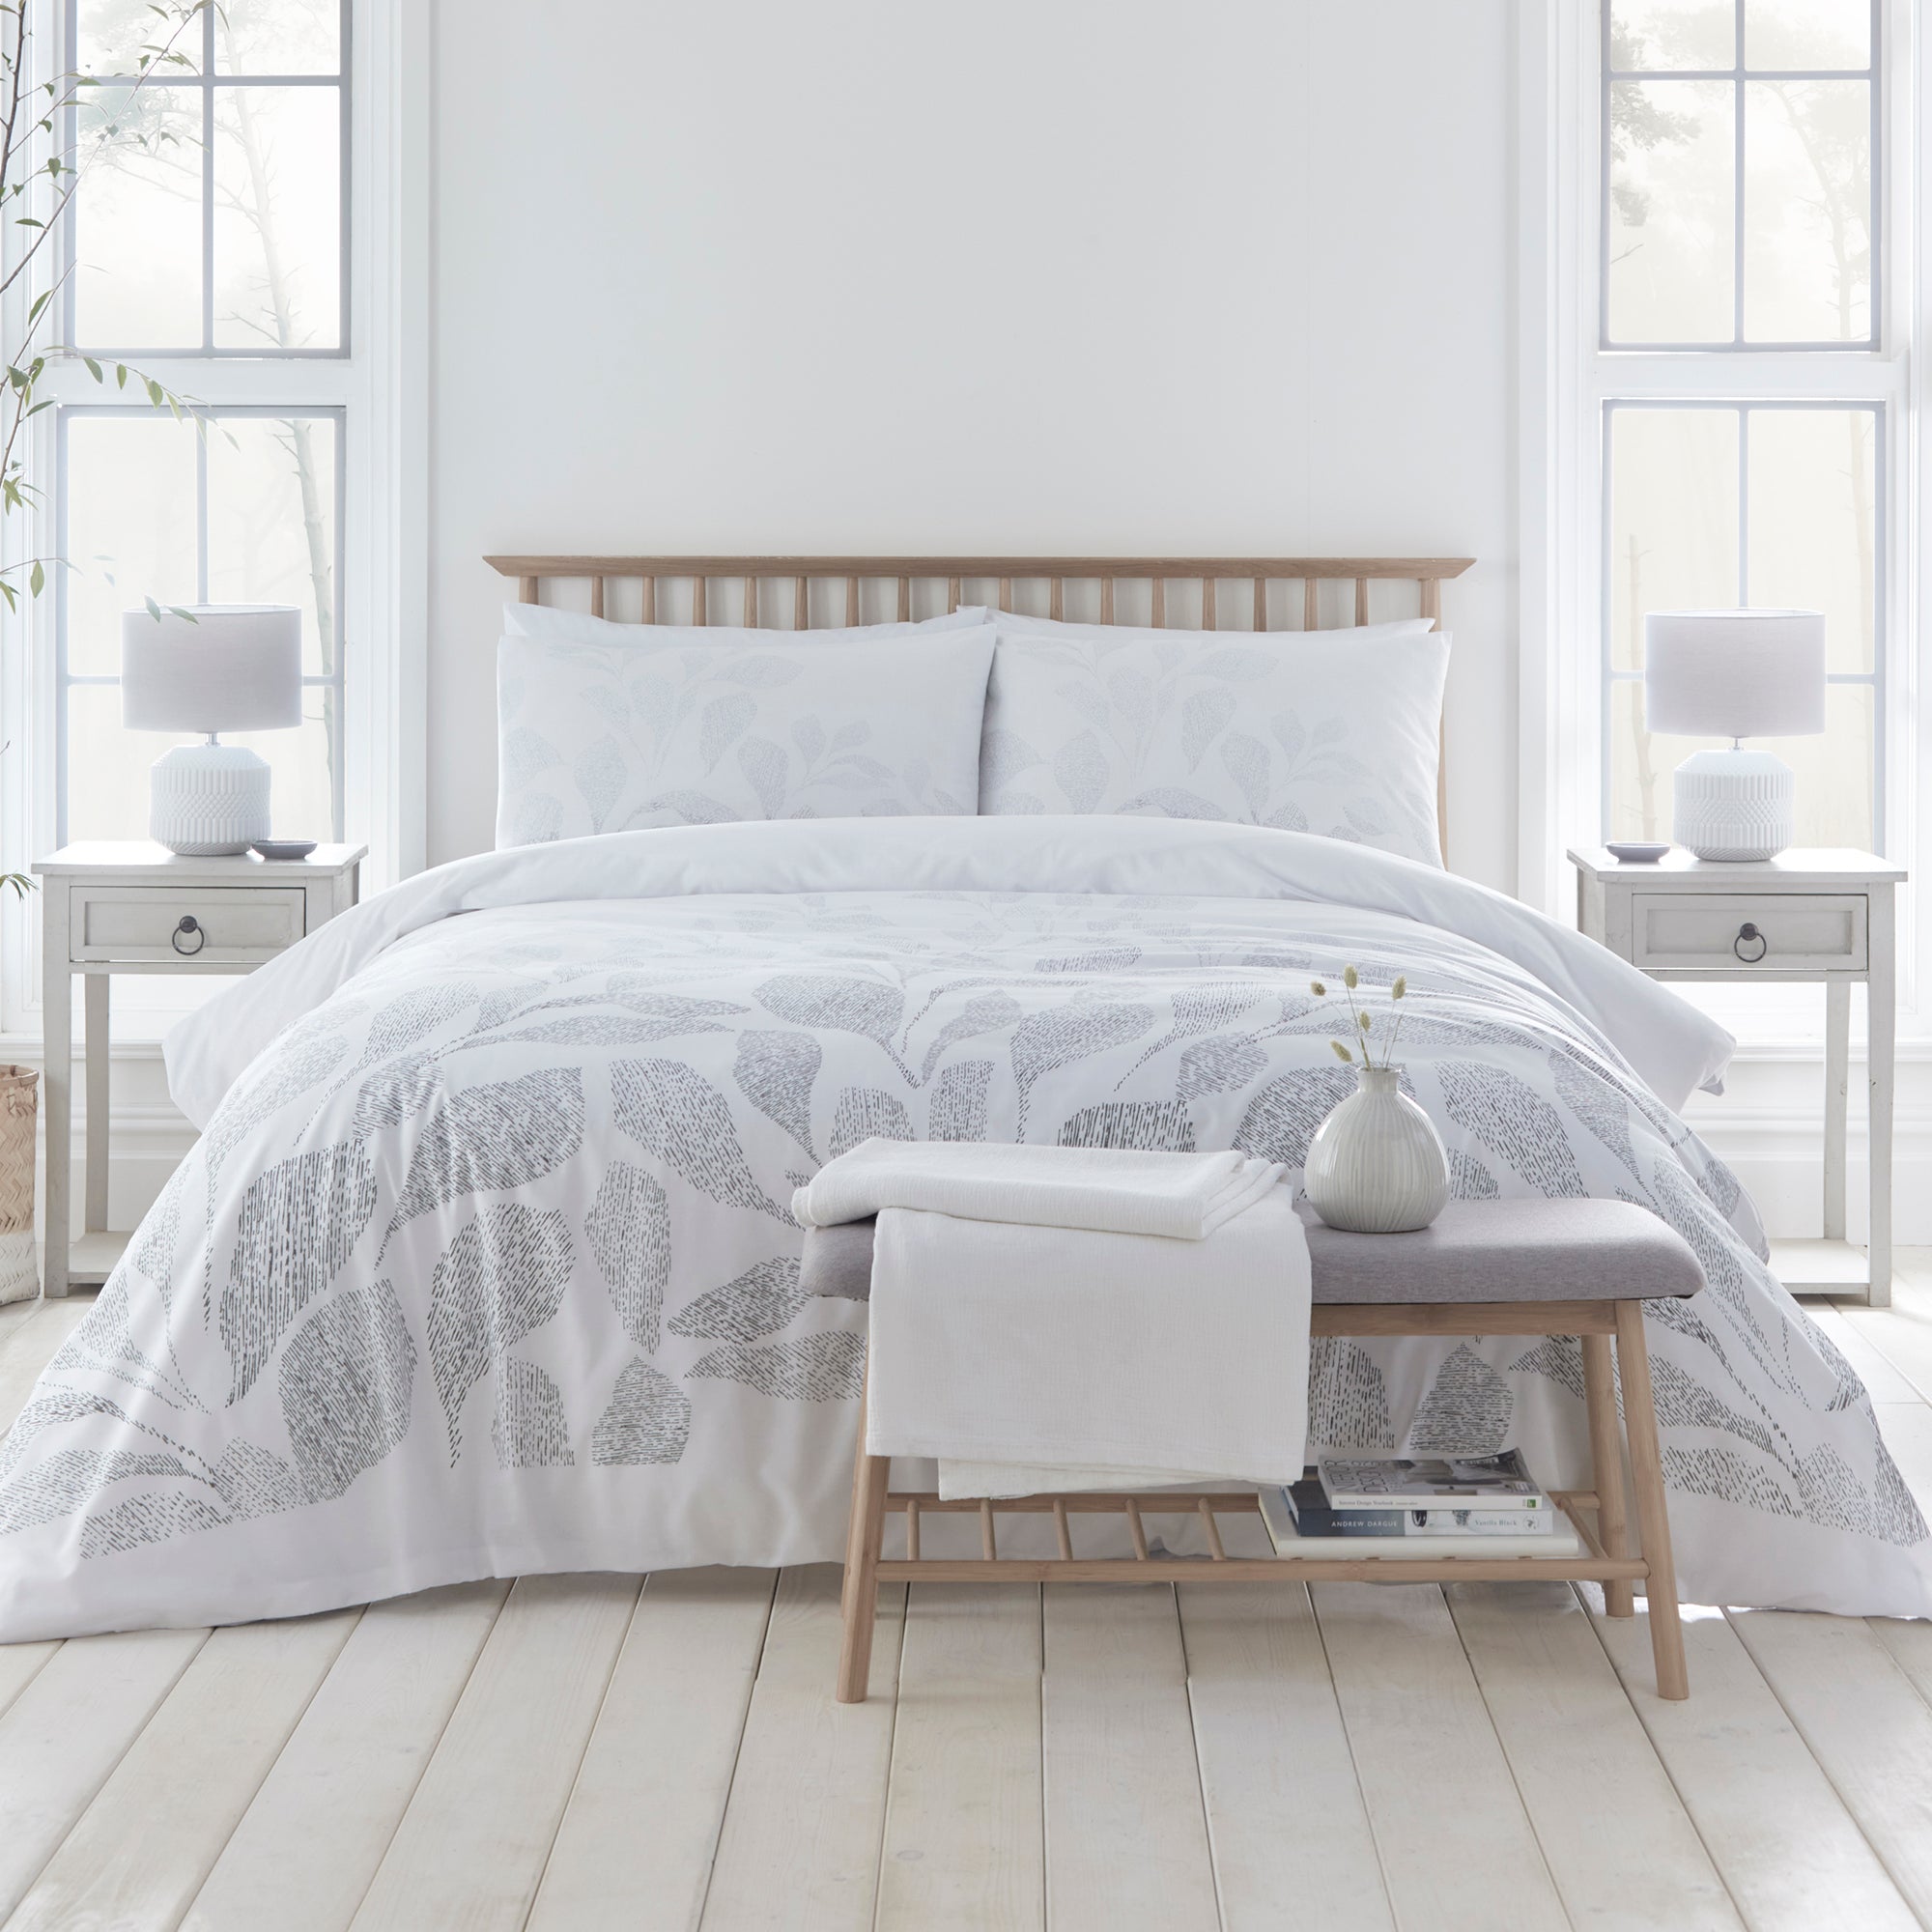 Textured Leaf - Eco-Friendly Duvet Cover Set in Silver by Drift Home